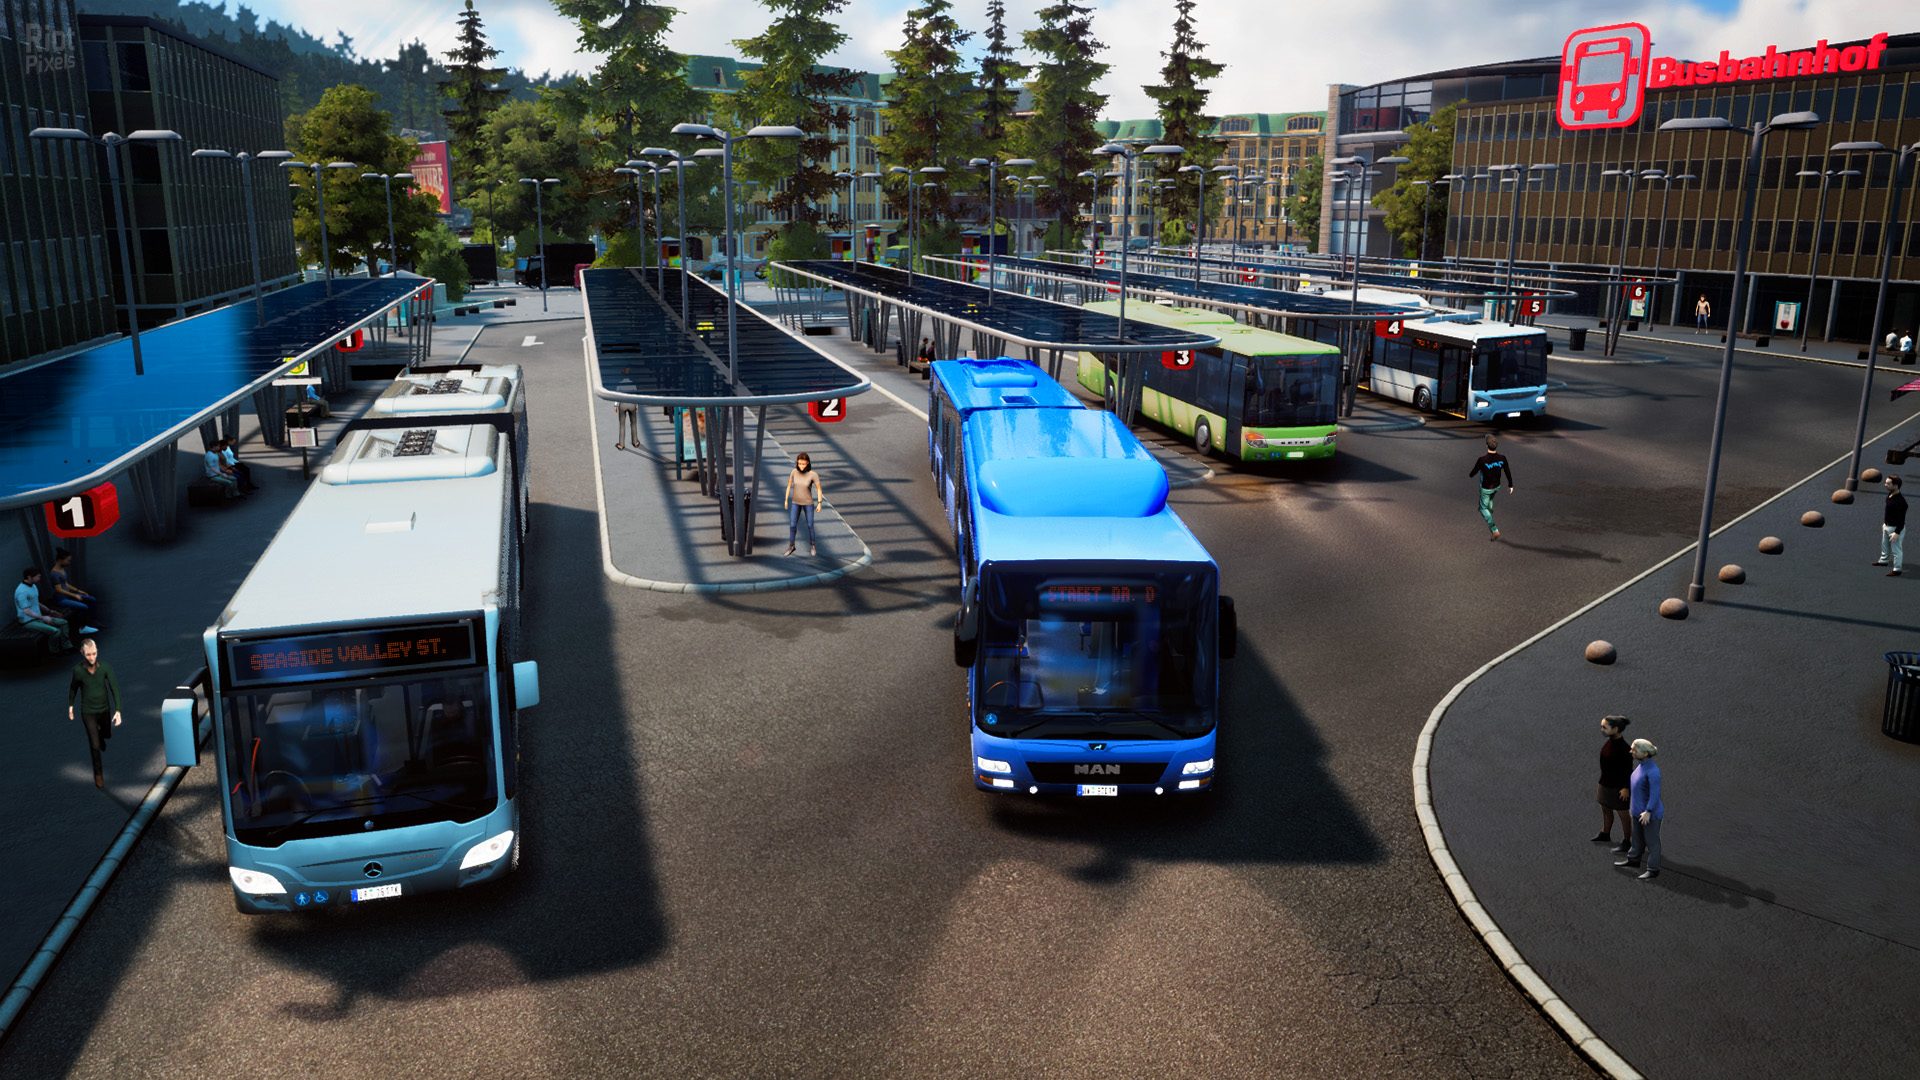 DOWNLOAD BUS SIMULATOR 2018 PC GAME HIGHLY COMPRESSED IN 500 MB PARTS - TRAX GAMING CENTER